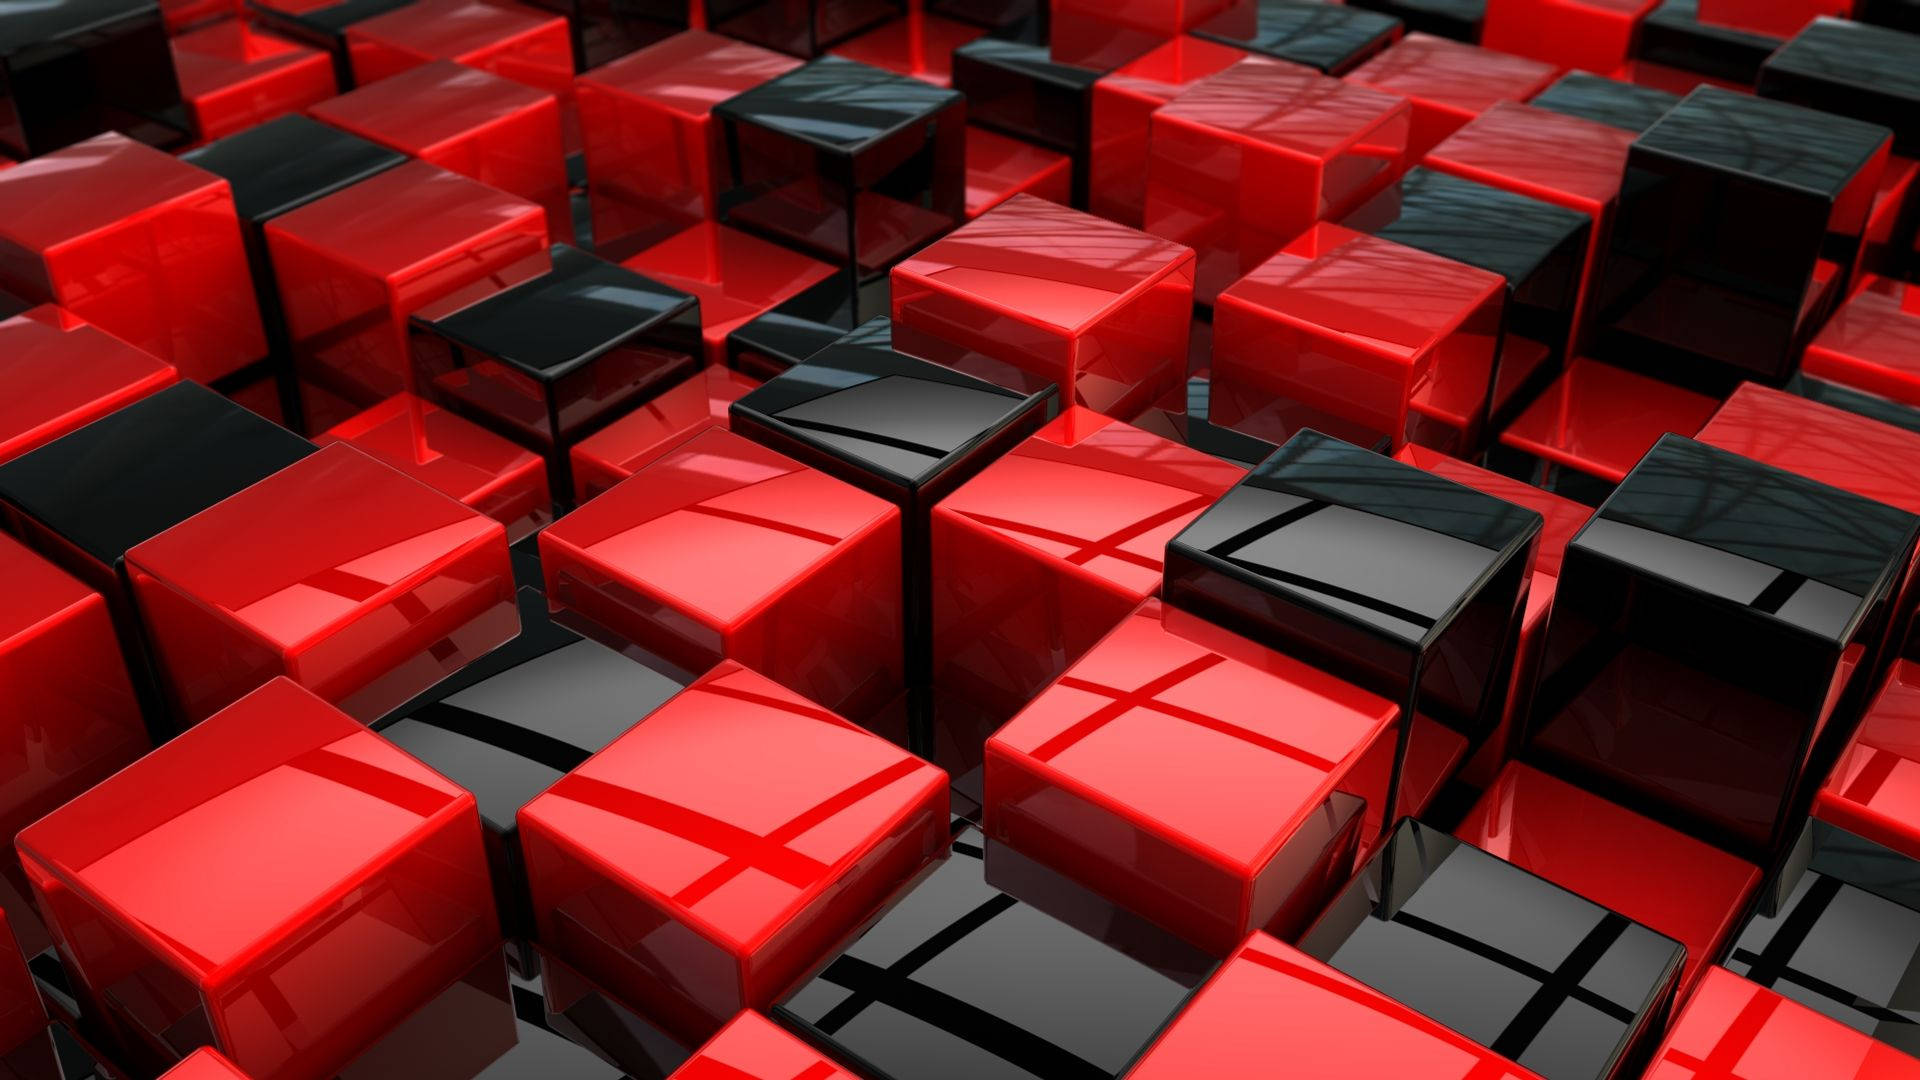 Modular Explosion Of Red And Black Cubes Wallpaper